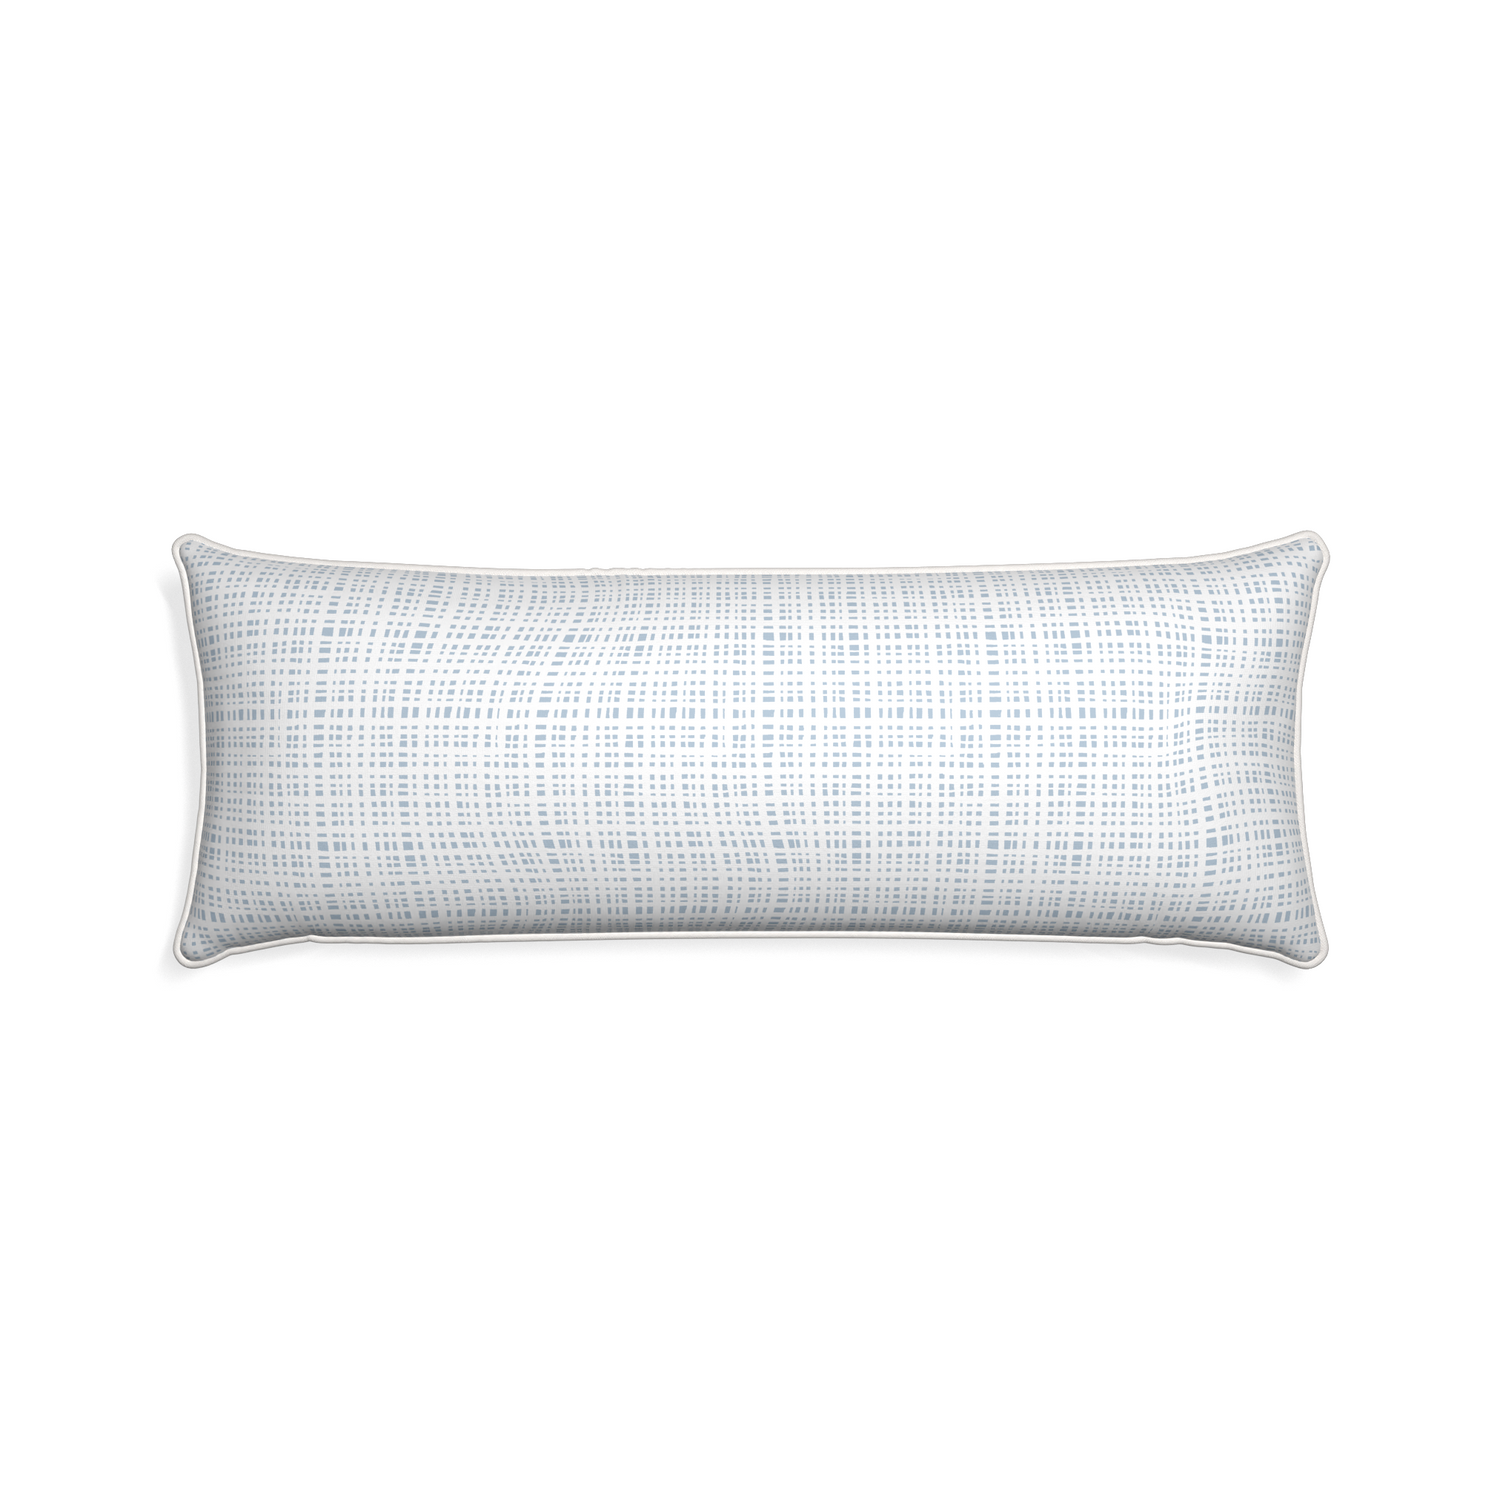 Xl-lumbar ginger custom plaid sky bluepillow with snow piping on white background